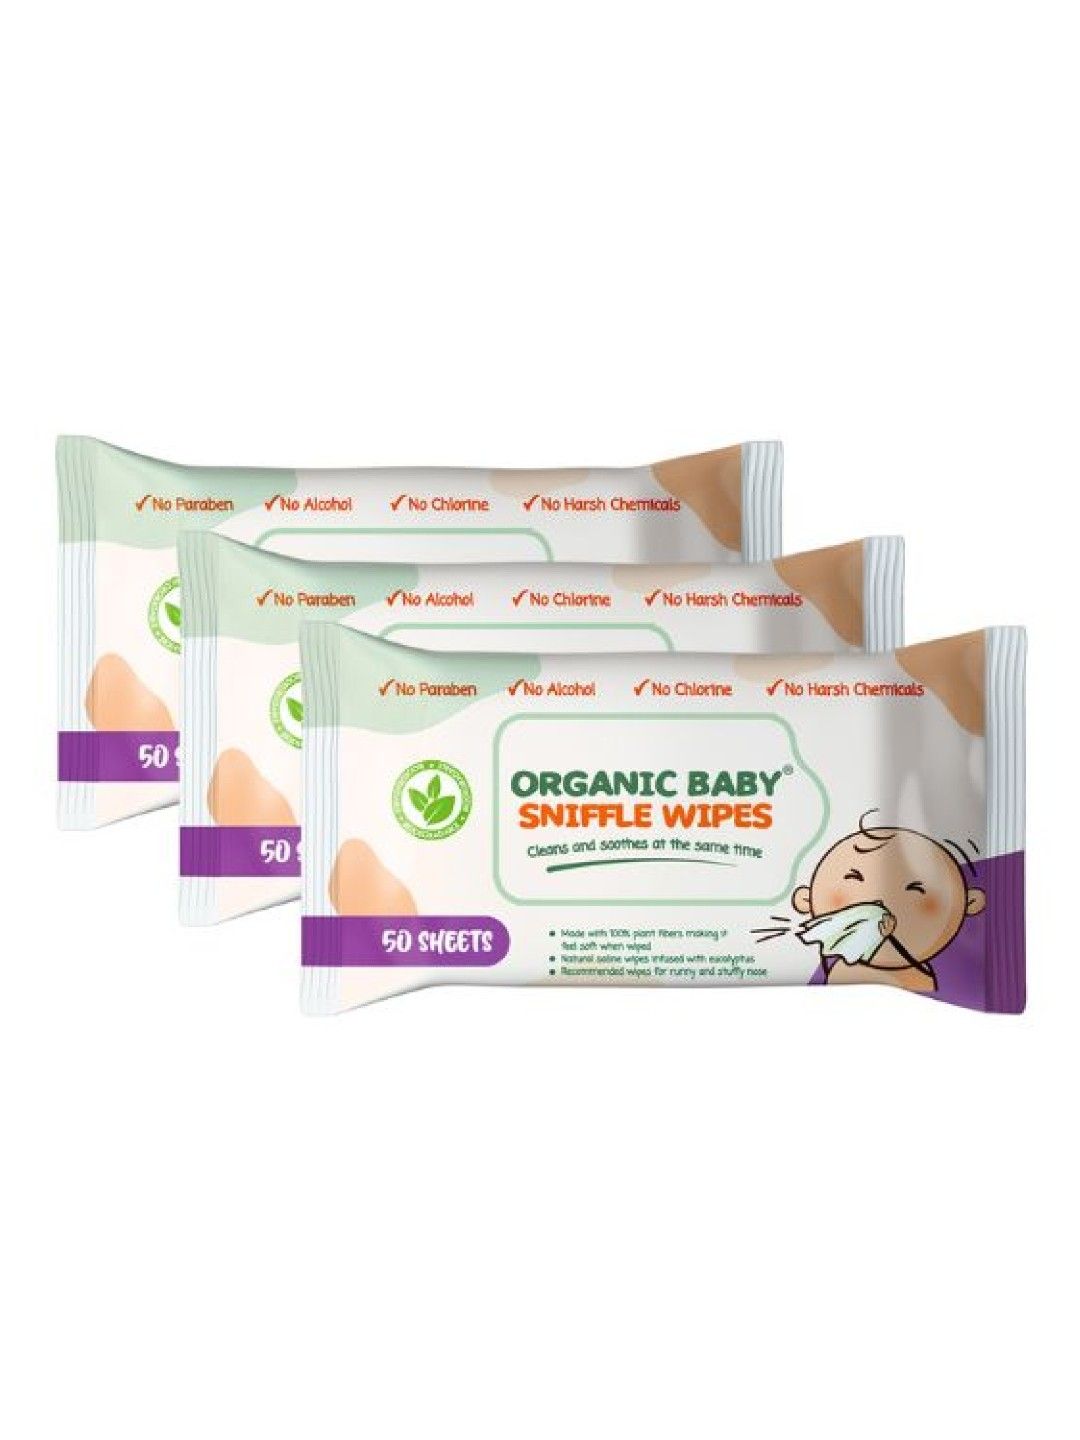 Organic Baby Wipes Sniffles Pack of 3